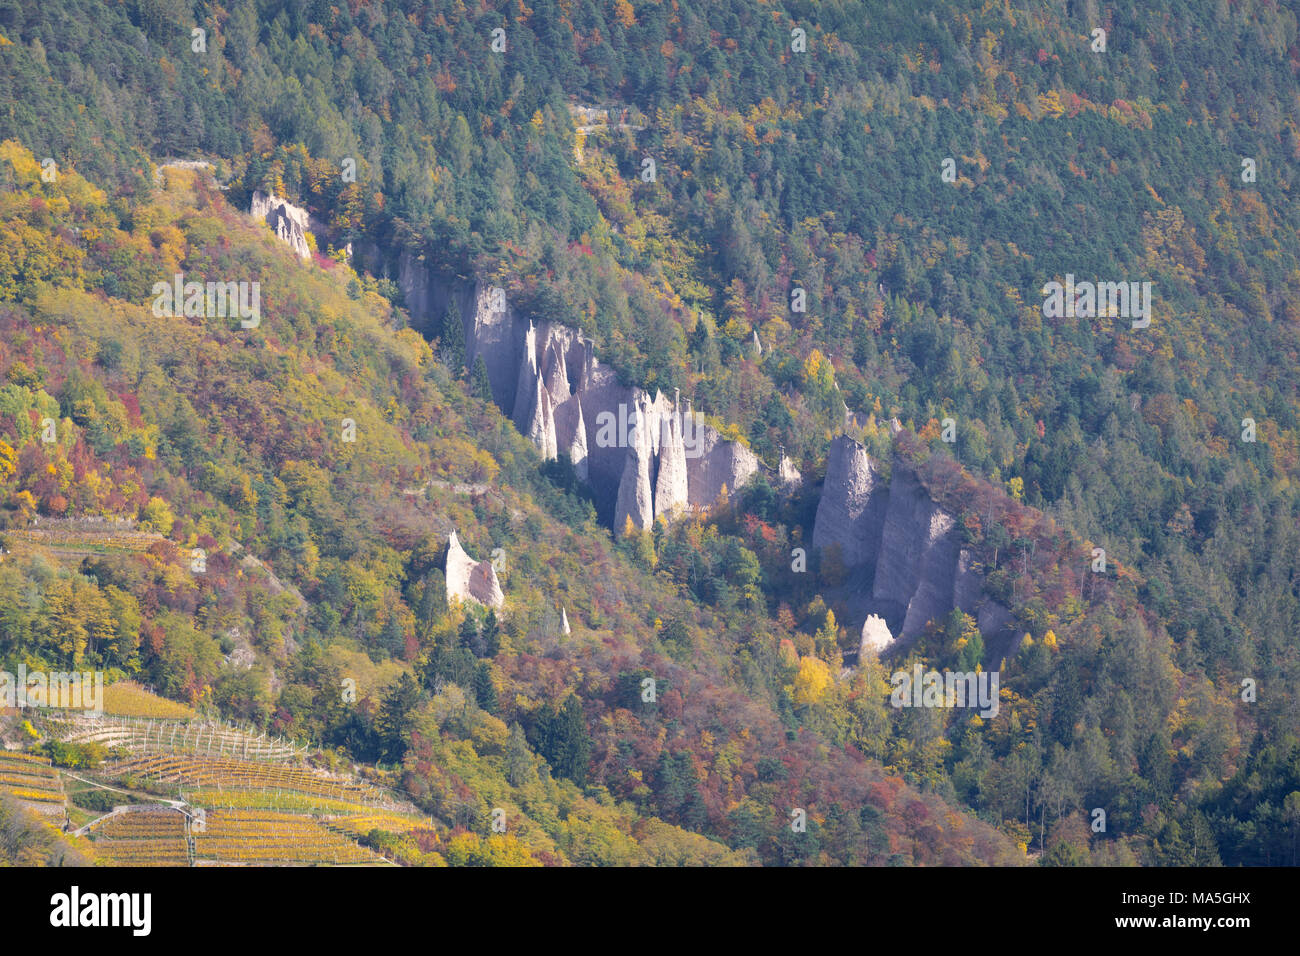 View of Cembra Valley in autumn and Segonzano Pyramids, Trentino District, Italy Stock Photo